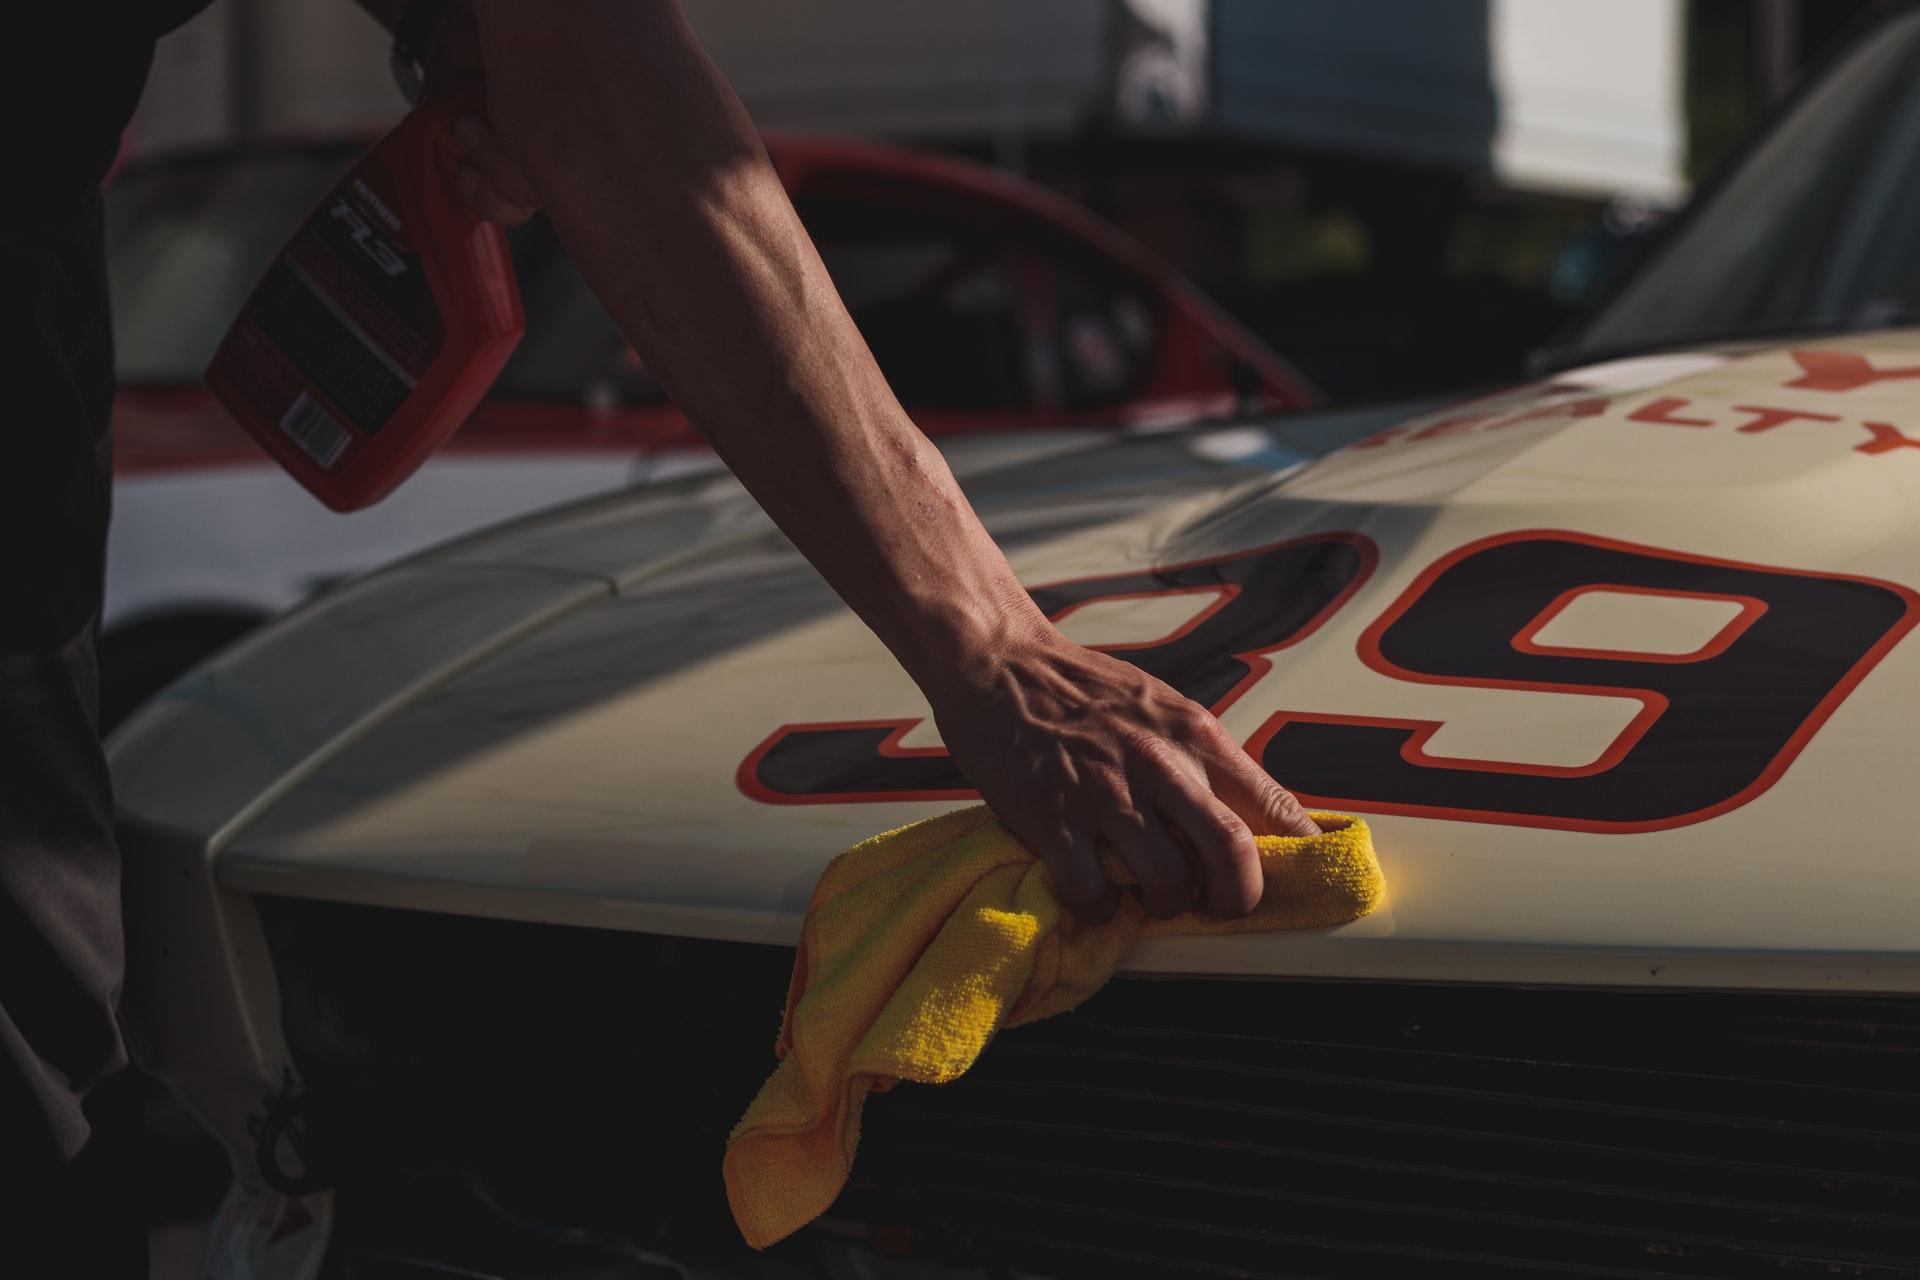 From daily care to stain removal, read on for car cleaning best practices.